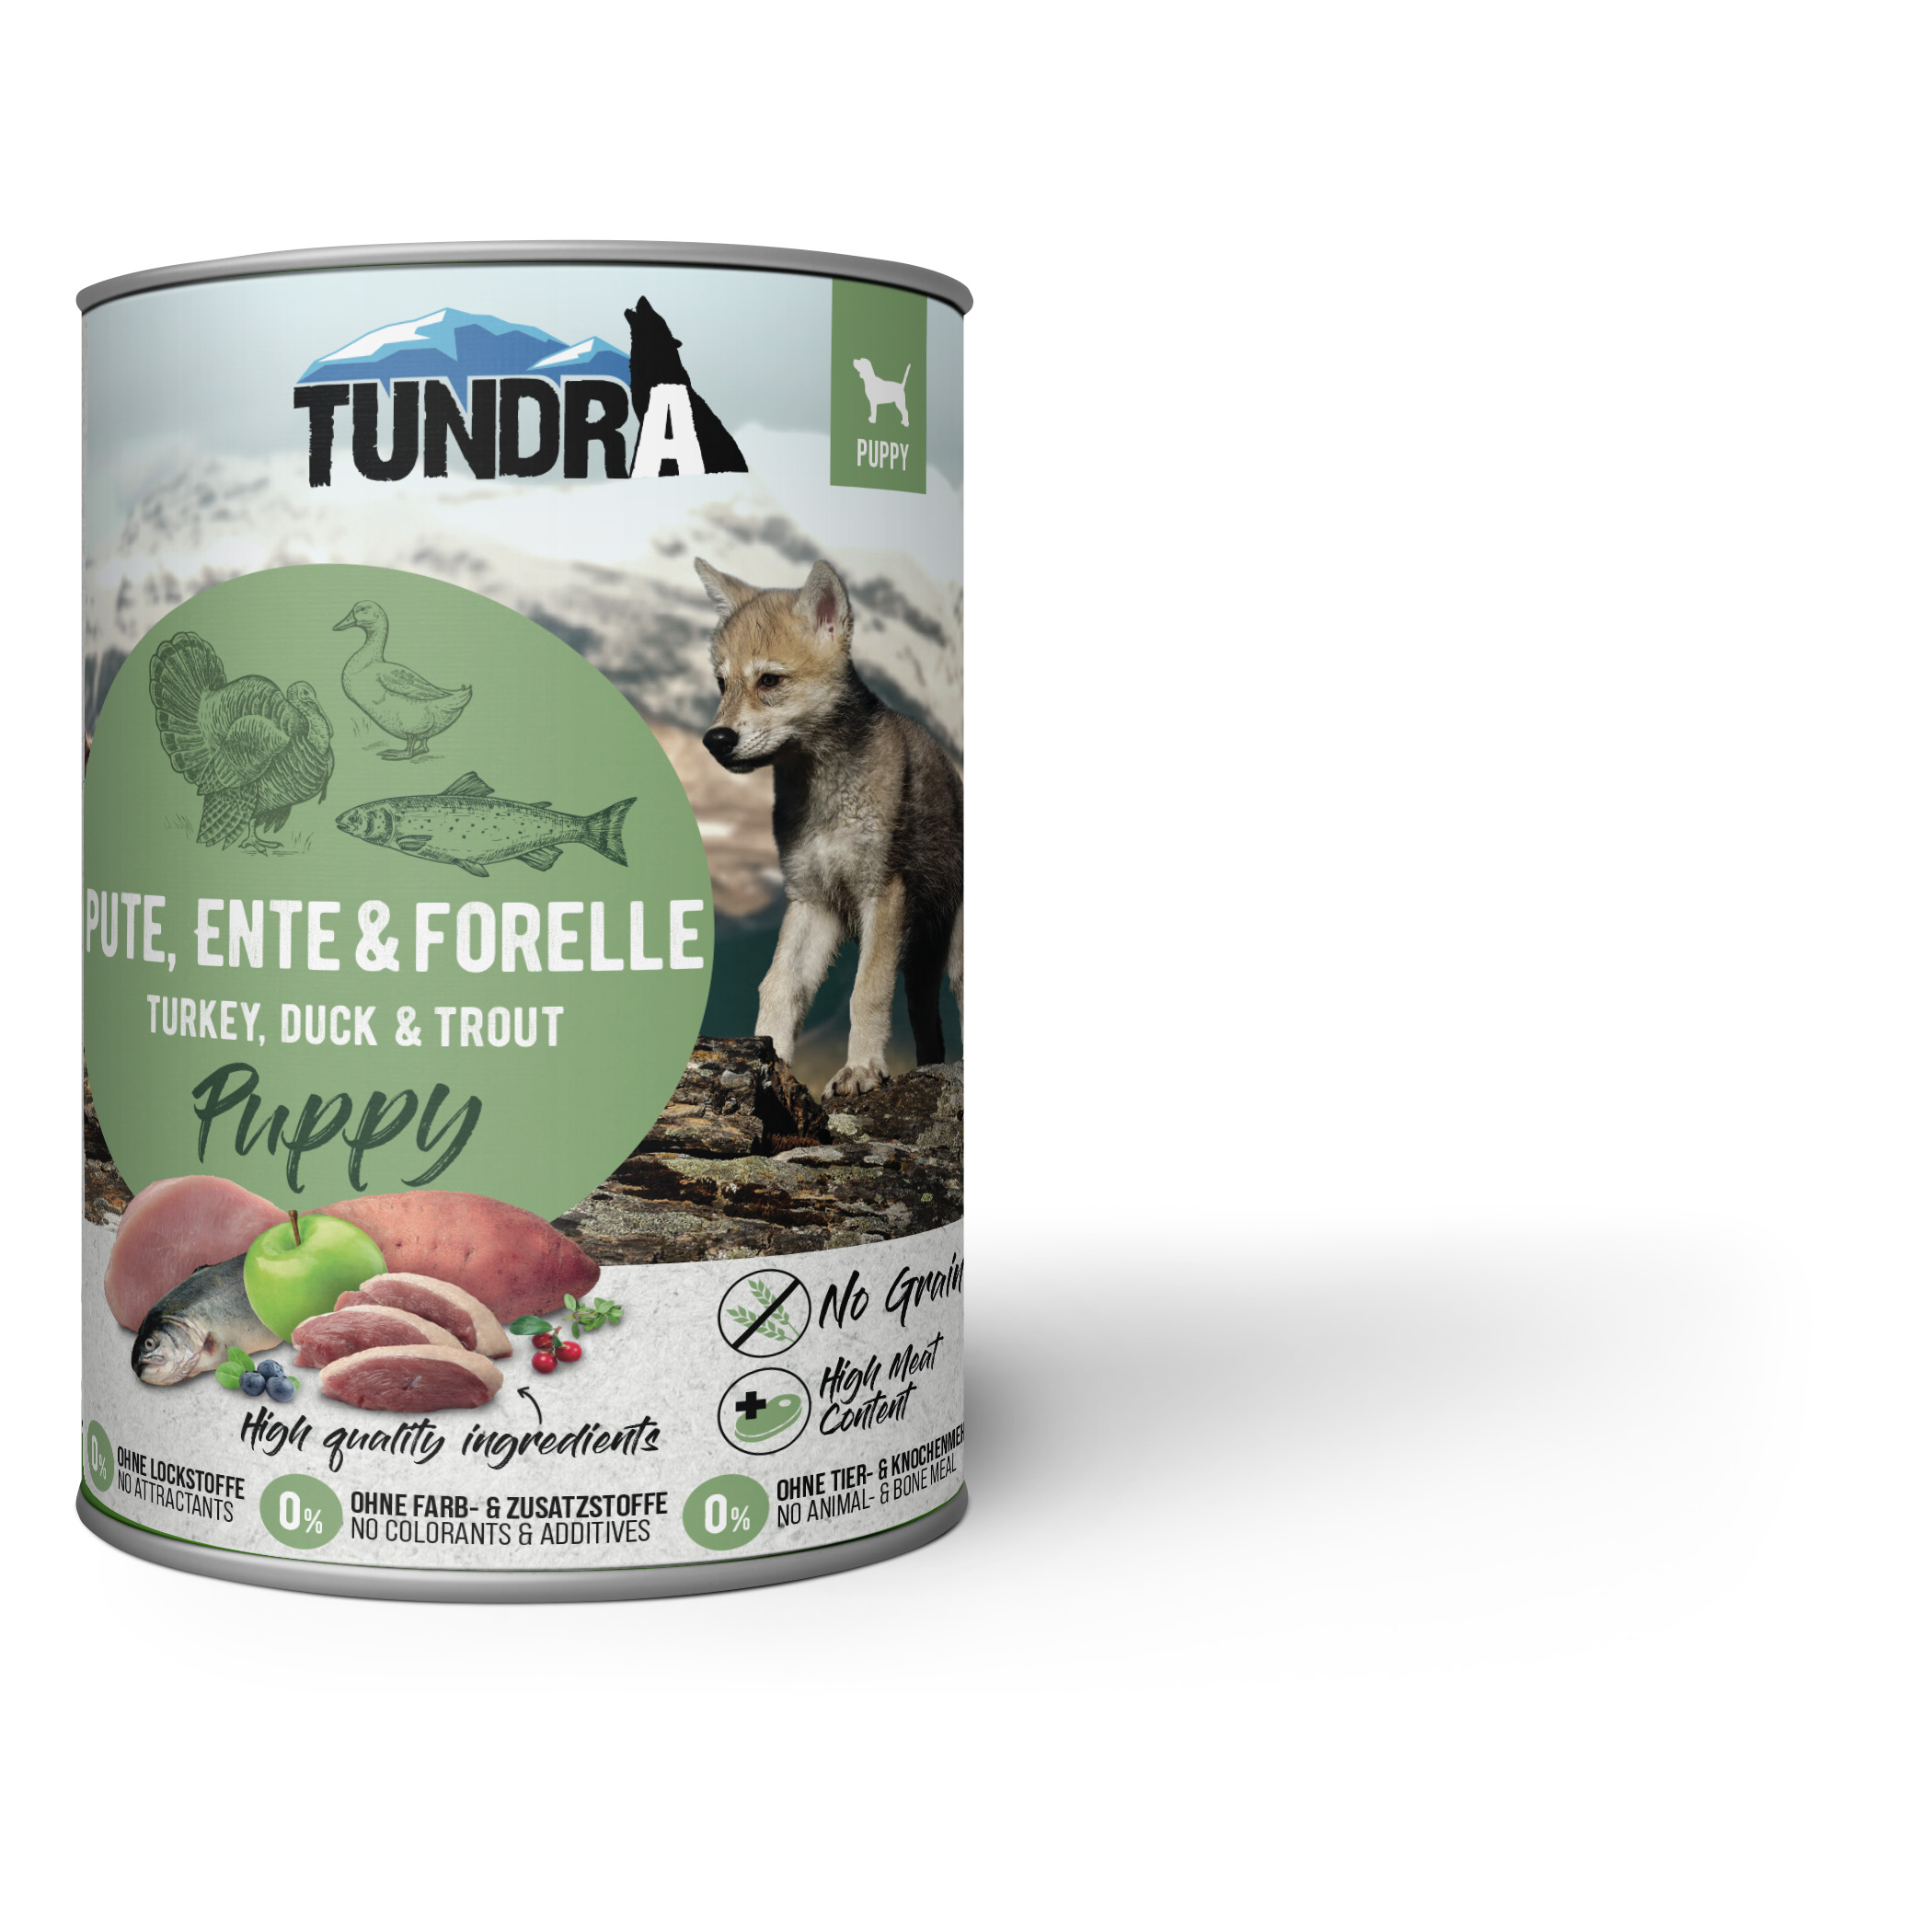 Tundra Dog Puppy Pute, Ente & Forelle 800g